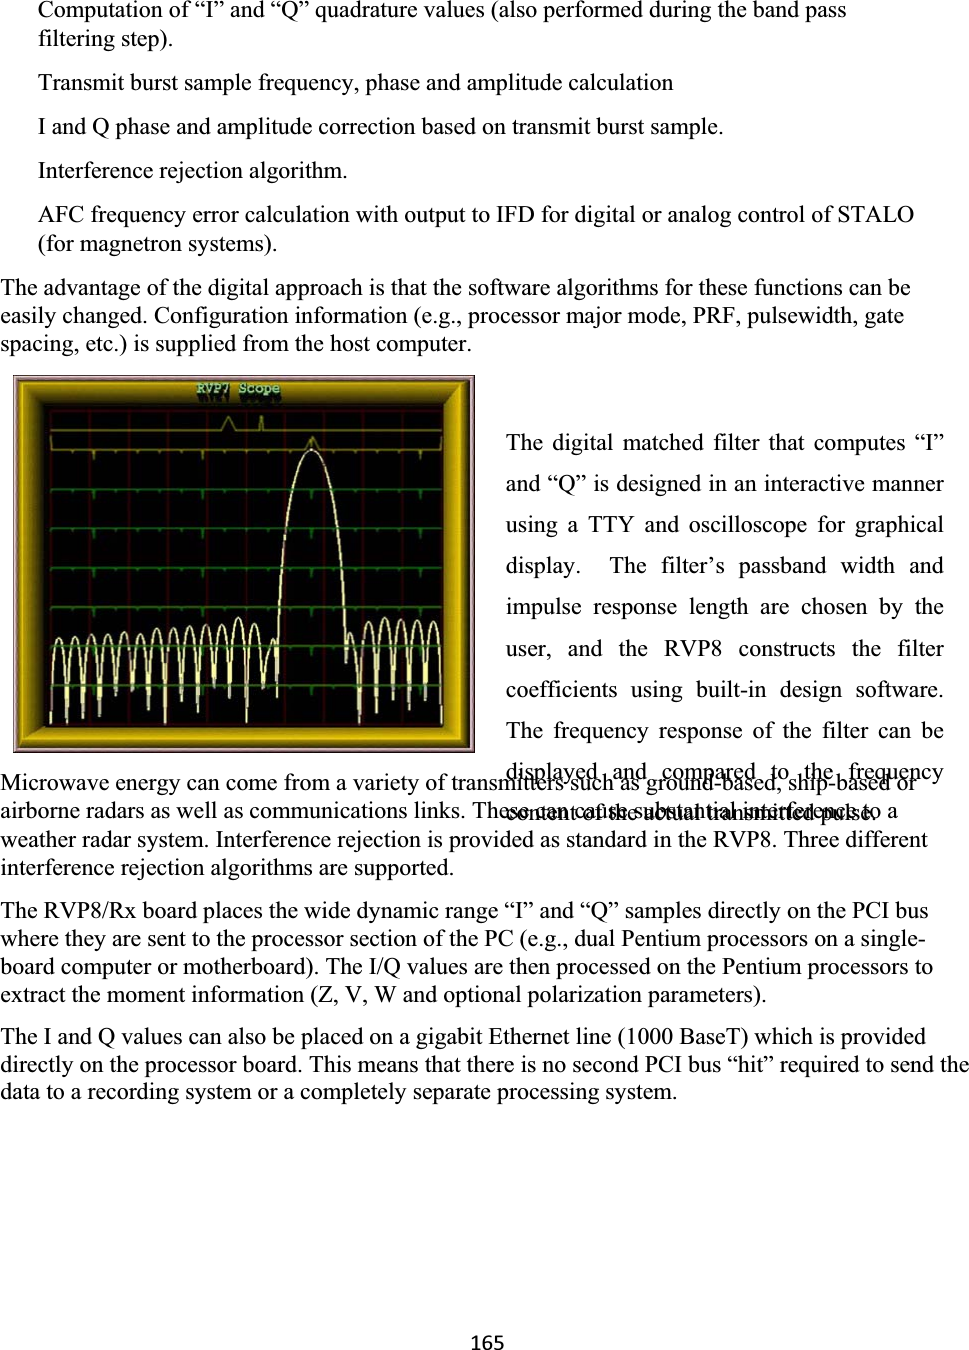 165Computation of “I” and “Q” quadrature values (also performed during the band pass filtering step).Transmit burst sample frequency, phase and amplitude calculation  I and Q phase and amplitude correction based on transmit burst sample.  Interference rejection algorithm.  AFC frequency error calculation with output to IFD for digital or analog control of STALO(for magnetron systems).  The advantage of the digital approach is that the software algorithms for these functions can be easily changed. Configuration information (e.g., processor major mode, PRF, pulsewidth, gate spacing, etc.) is supplied from the host computer.  The digital matched filter that computes “I”and “Q” is designed in an interactive mannerusing a TTY and oscilloscope for graphicaldisplay.  The filter’s passband width andimpulse response length are chosen by theuser, and the RVP8 constructs the filtercoefficients using built-in design software.The frequency response of the filter can bedisplayed and compared to the frequencycontent of the actual transmitted pulse.  Microwave energy can come from a variety of transmitters such as ground-based, ship-based or airborne radars as well as communications links. These can cause substantial interference to a weather radar system. Interference rejection is provided as standard in the RVP8. Three different interference rejection algorithms are supported.  The RVP8/Rx board places the wide dynamic range “I” and “Q” samples directly on the PCI bus where they are sent to the processor section of the PC (e.g., dual Pentium processors on a single-board computer or motherboard). The I/Q values are then processed on the Pentium processors to extract the moment information (Z, V, W and optional polarization parameters).  The I and Q values can also be placed on a gigabit Ethernet line (1000 BaseT) which is provided directly on the processor board. This means that there is no second PCI bus “hit” required to send the data to a recording system or a completely separate processing system.  